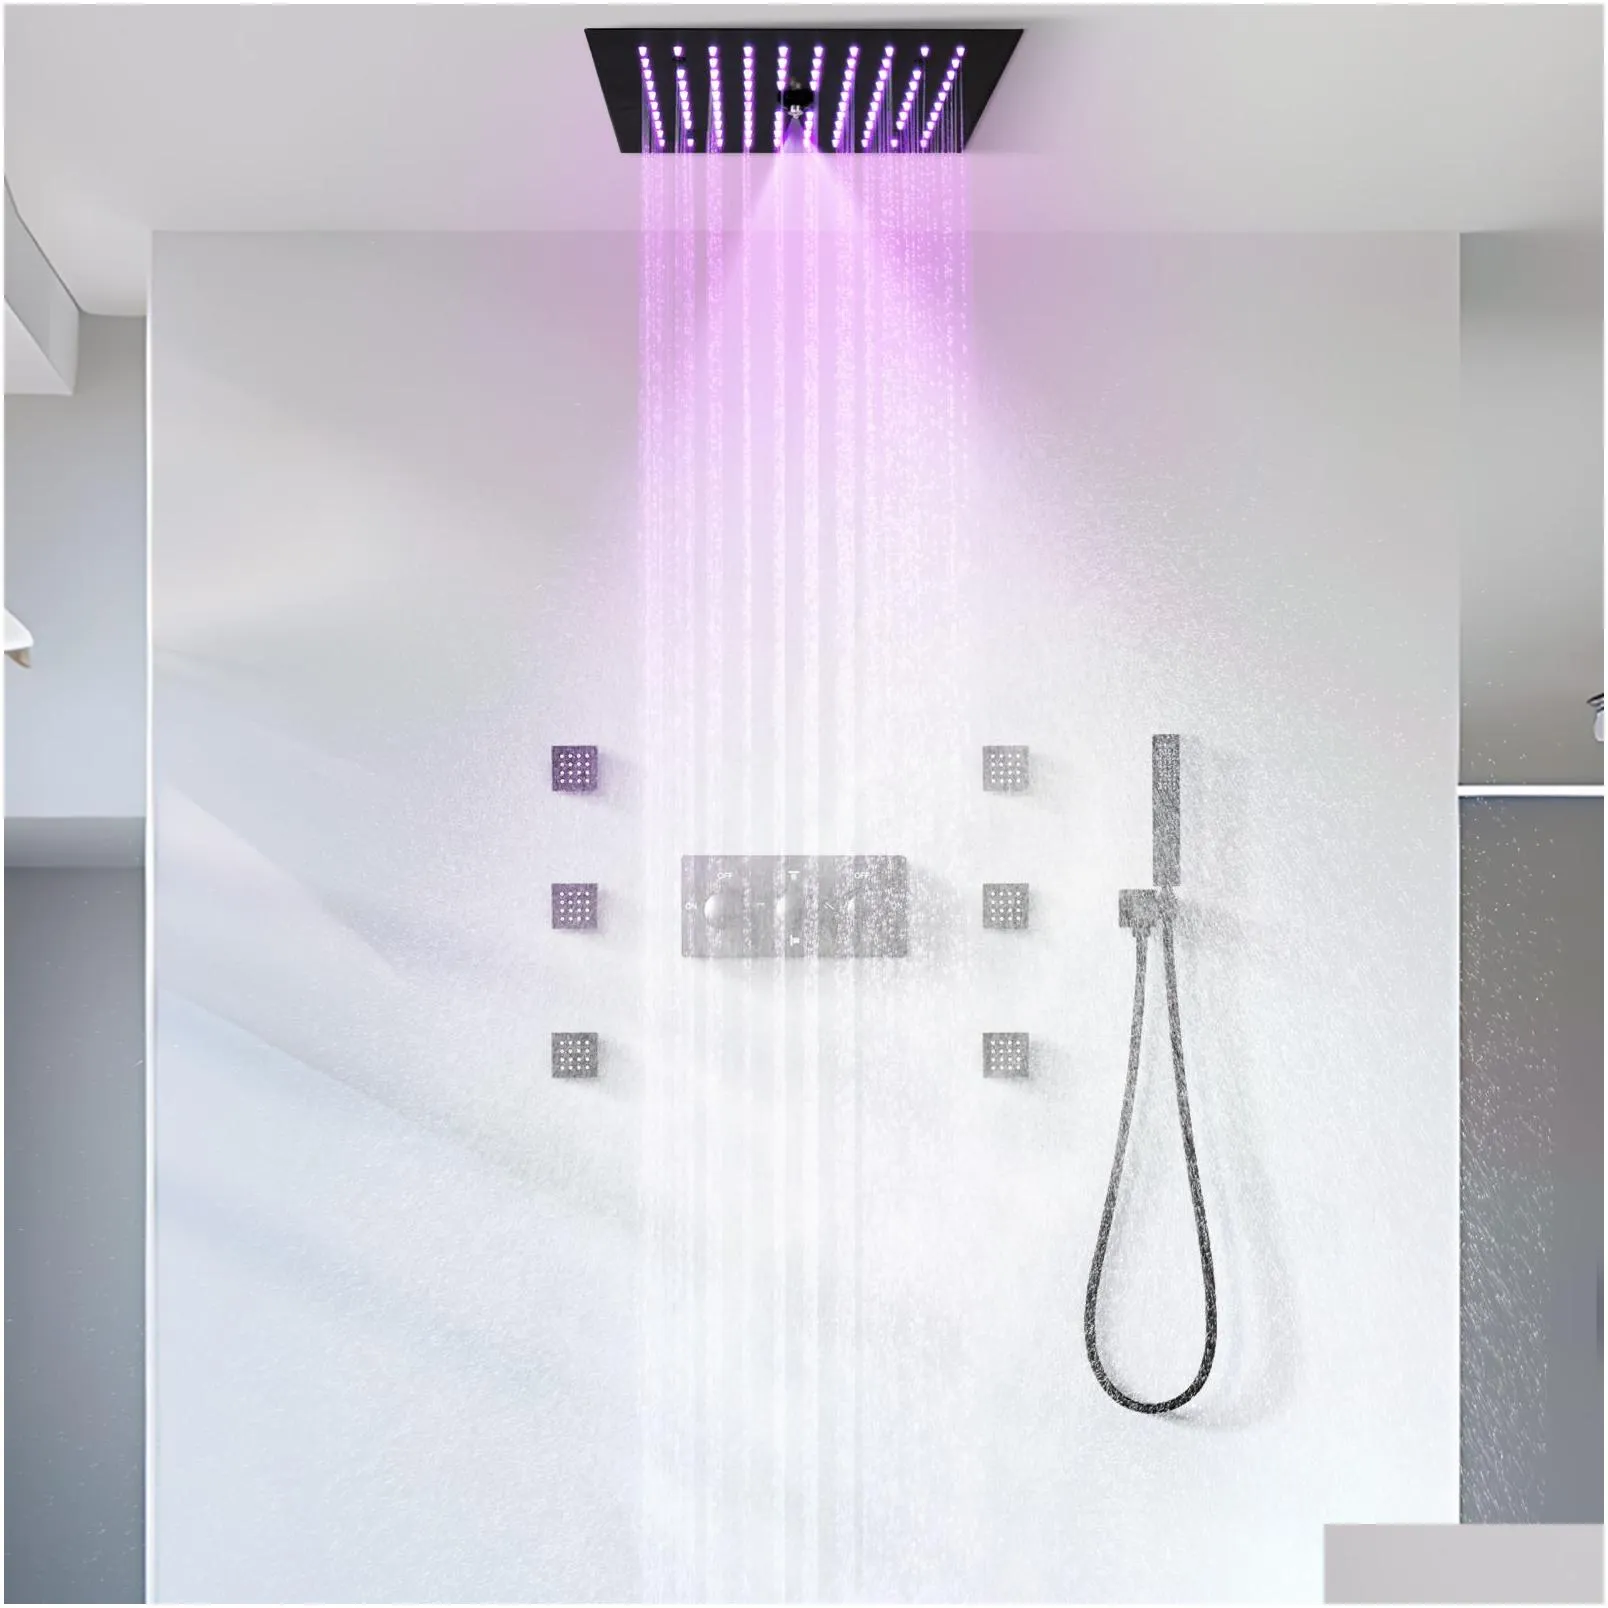 Matte Black LED Shower System Ceiling Mounted 12 Inch Mist and Rain Shower Head Bathroom Cold and Hot Shower Faucet Set